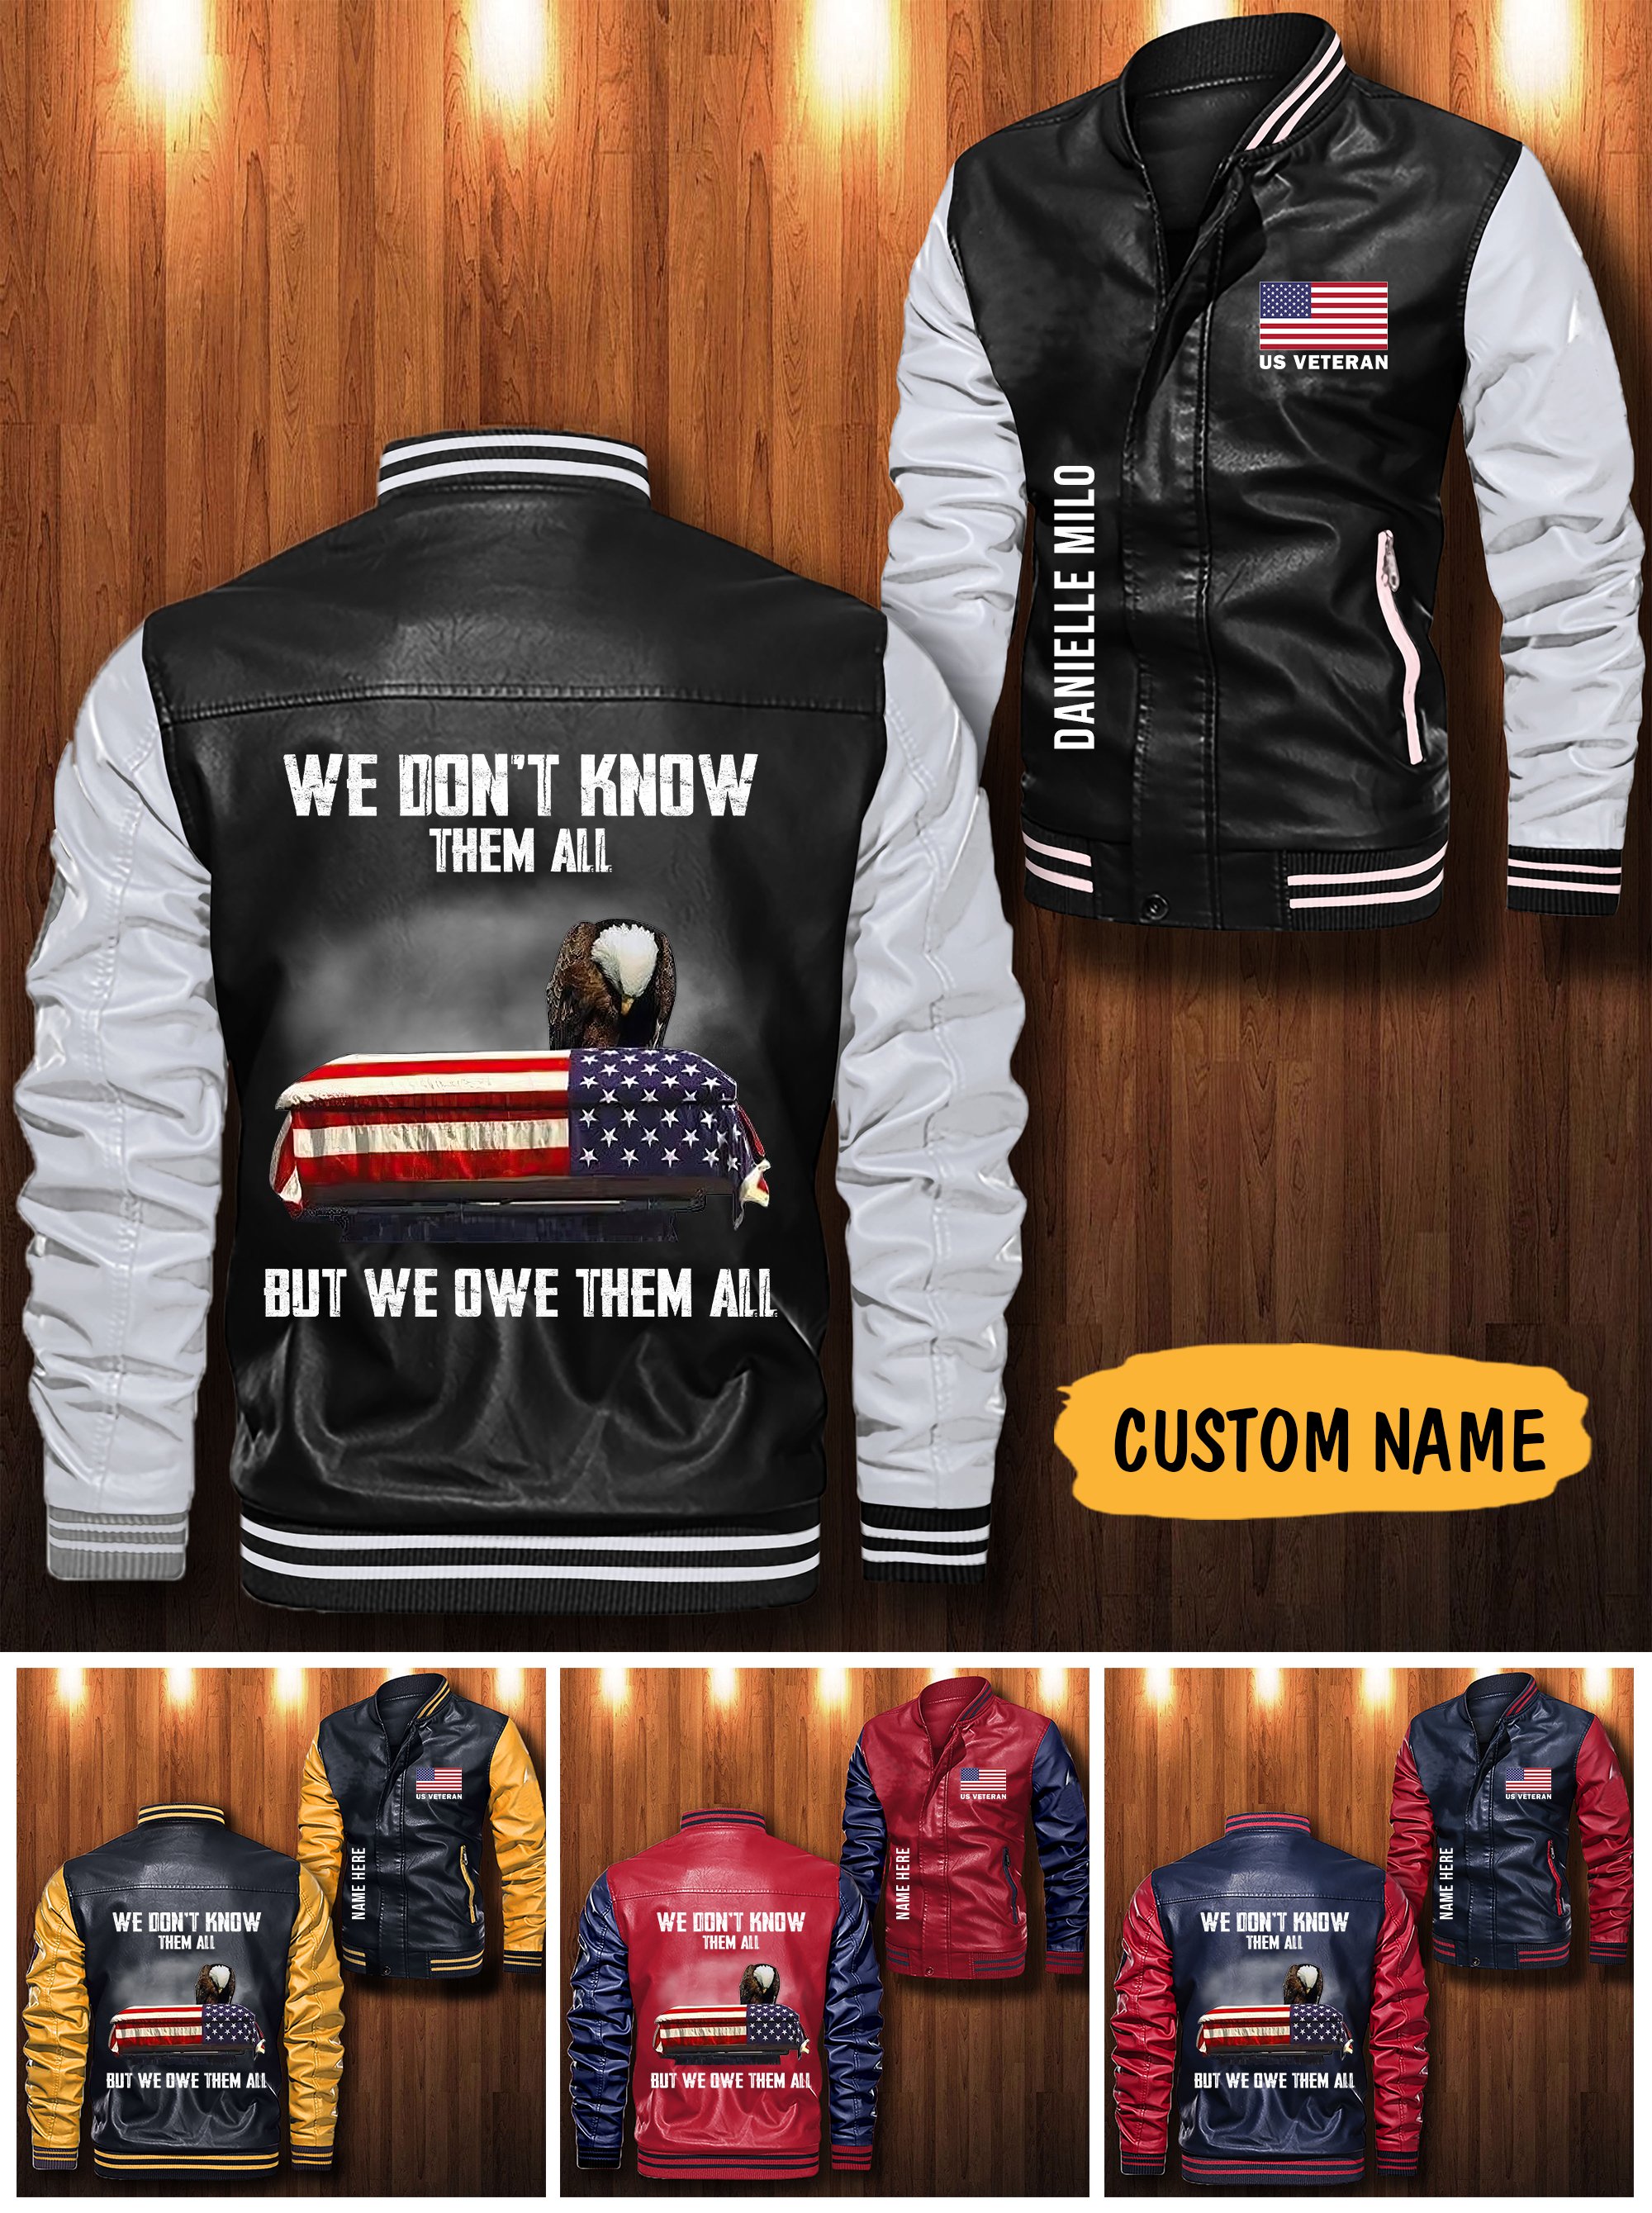 US veteran we don’t know them all but we owe them all custom personalized Leather Bomber Jacket – LIMITED EDITION